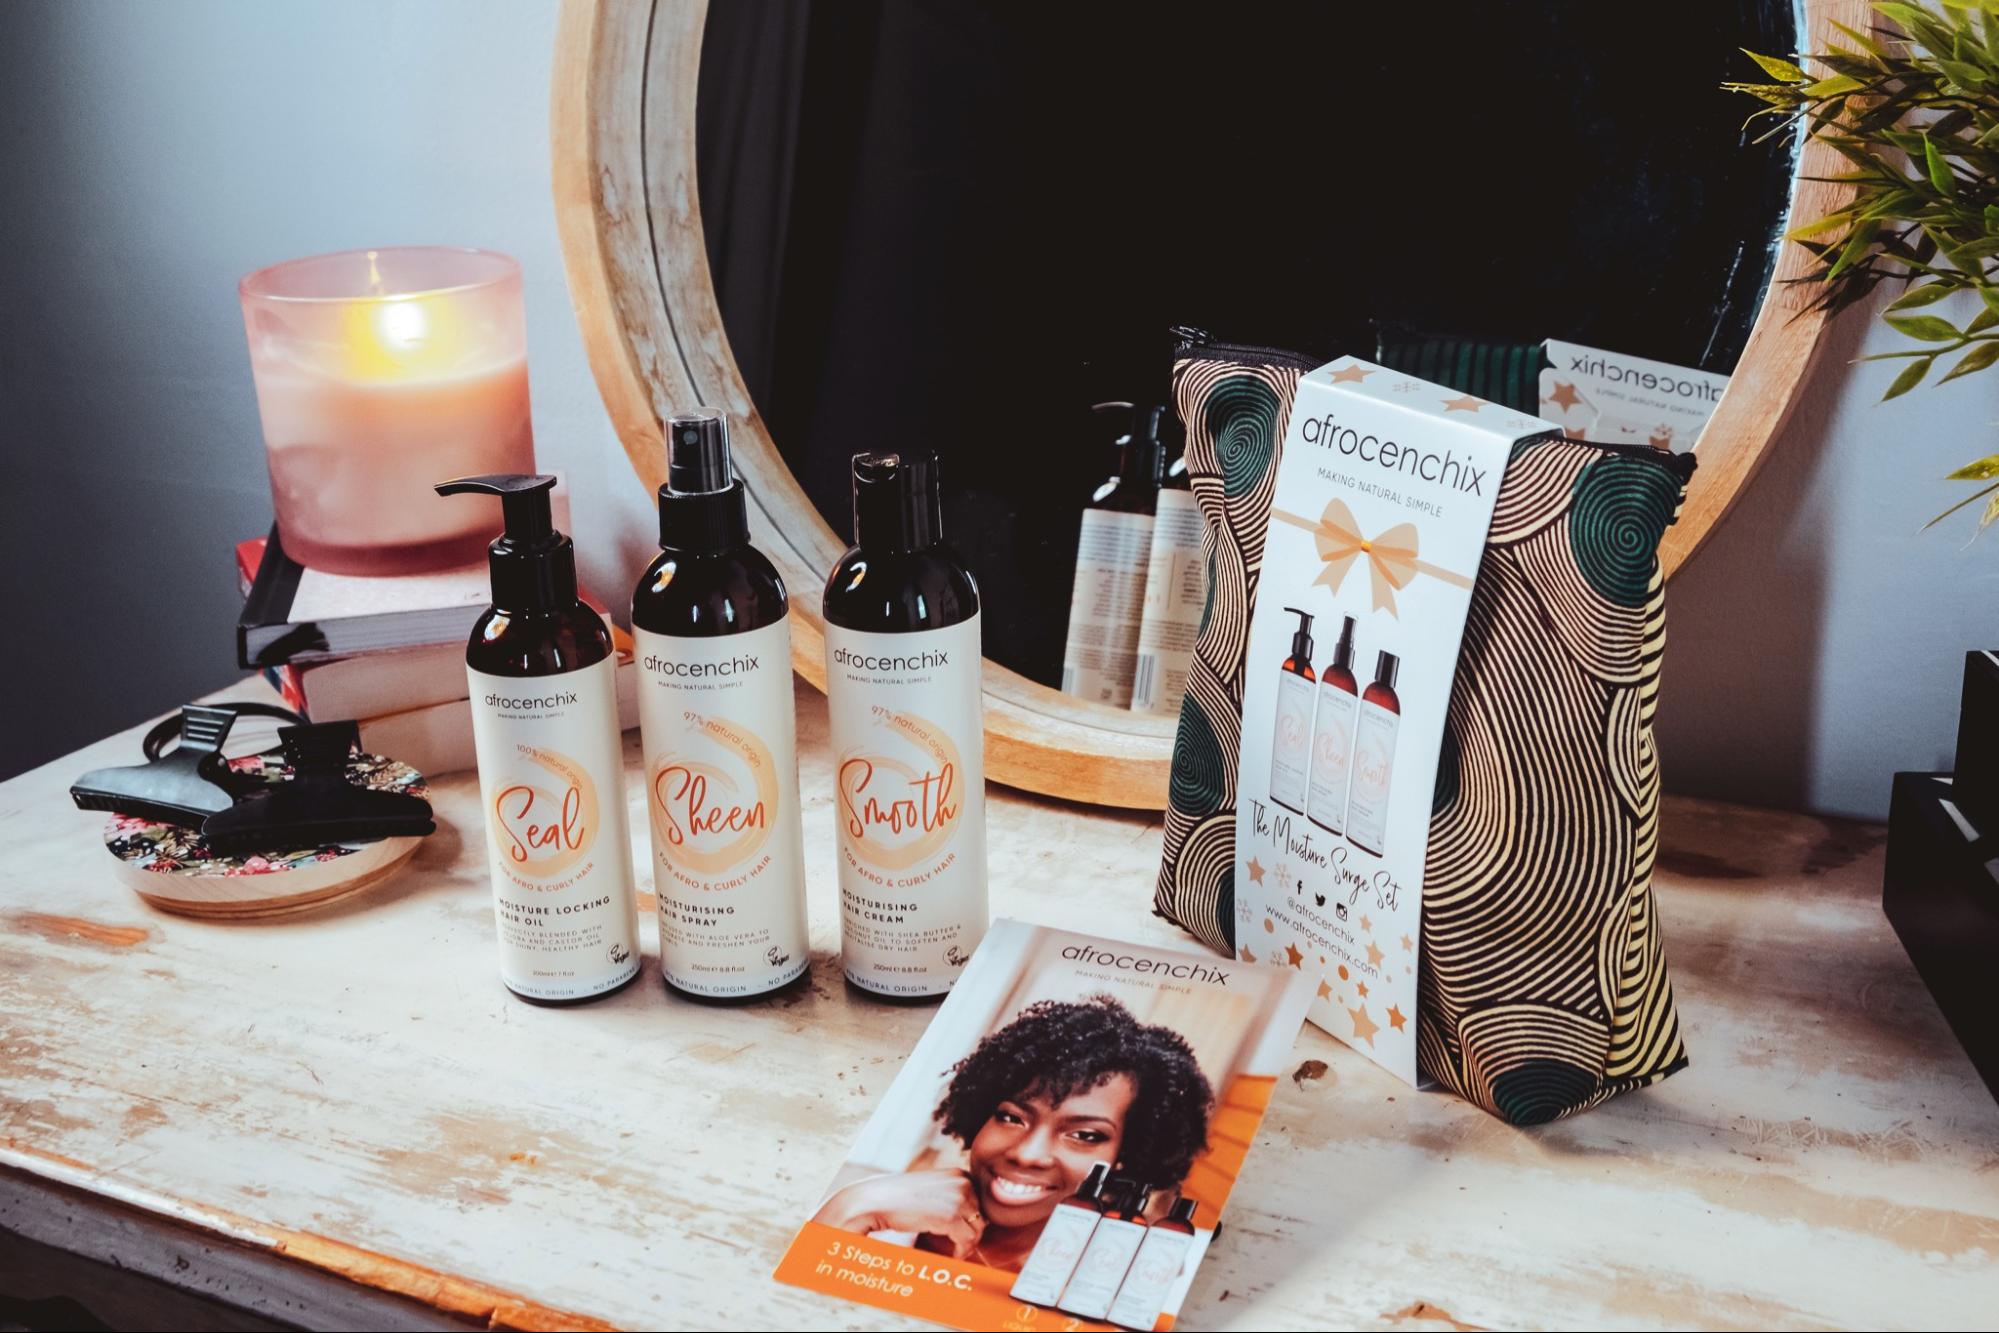 A selection of Afrocenchix products backdropped by a makeup back and mirror along with books and a candle. 